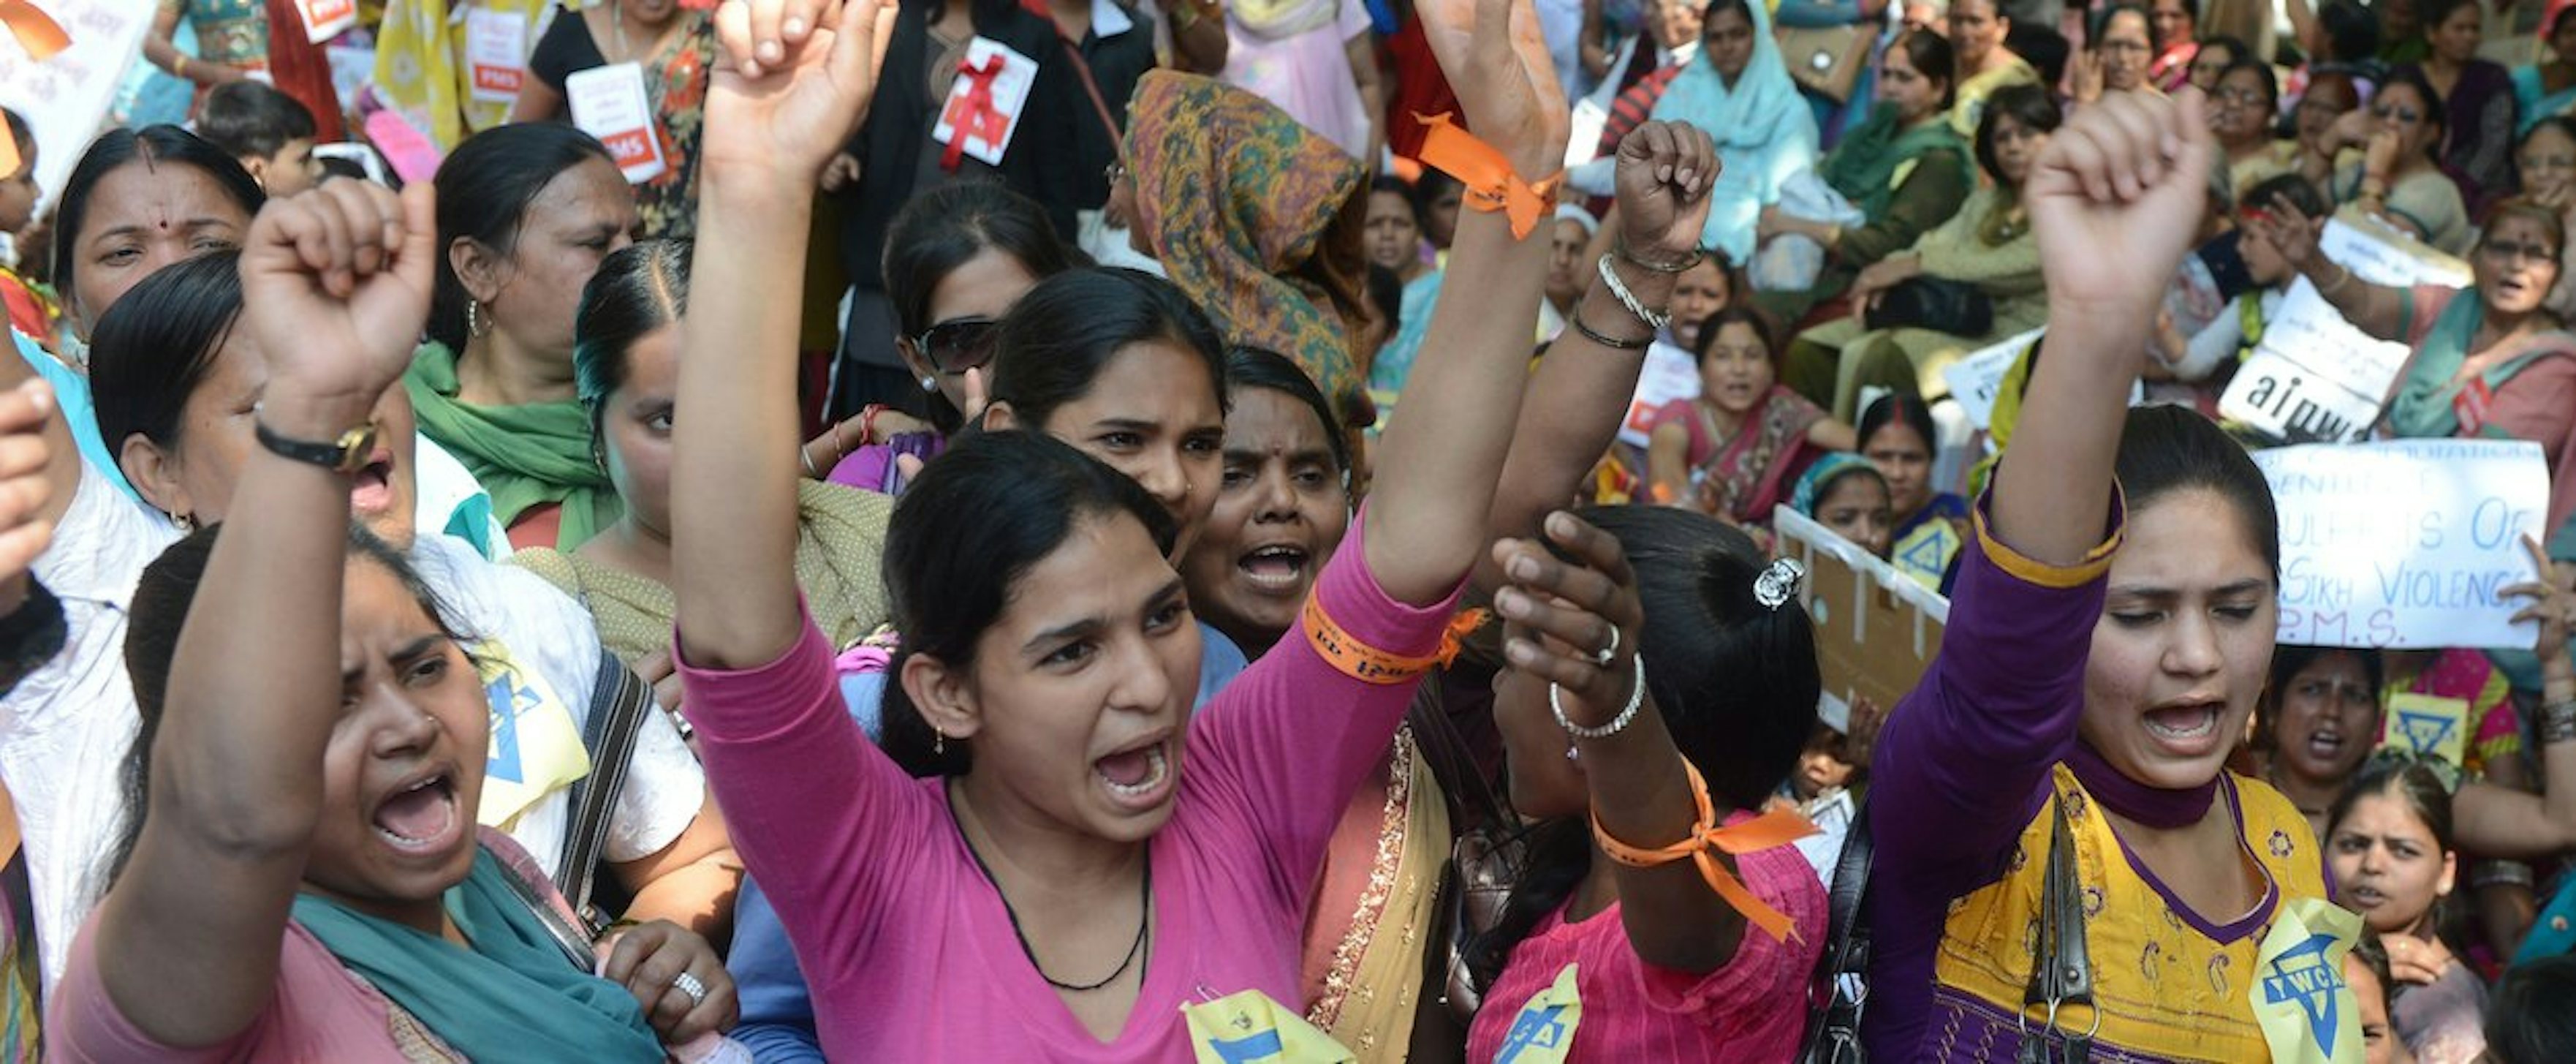 Violence Against Women in India is Going to Get Even Worse | The New ...